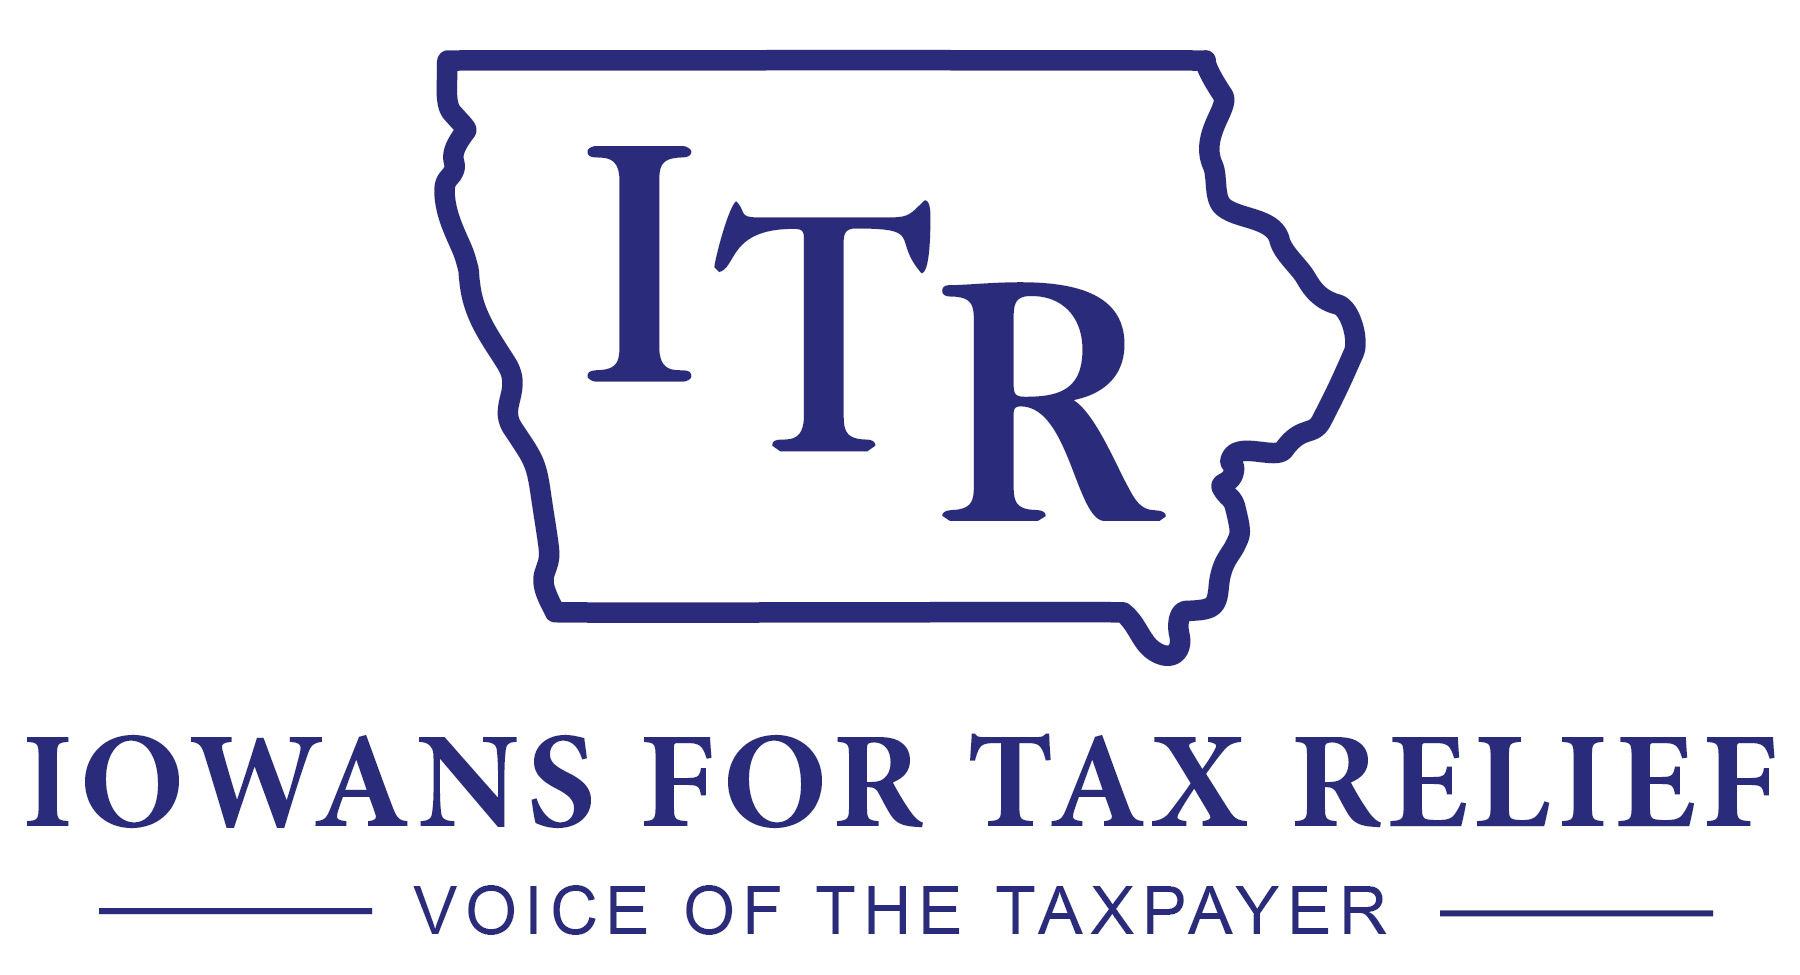 Iowans Paid $500 Million More in State Taxes - Iowans for Tax Relief